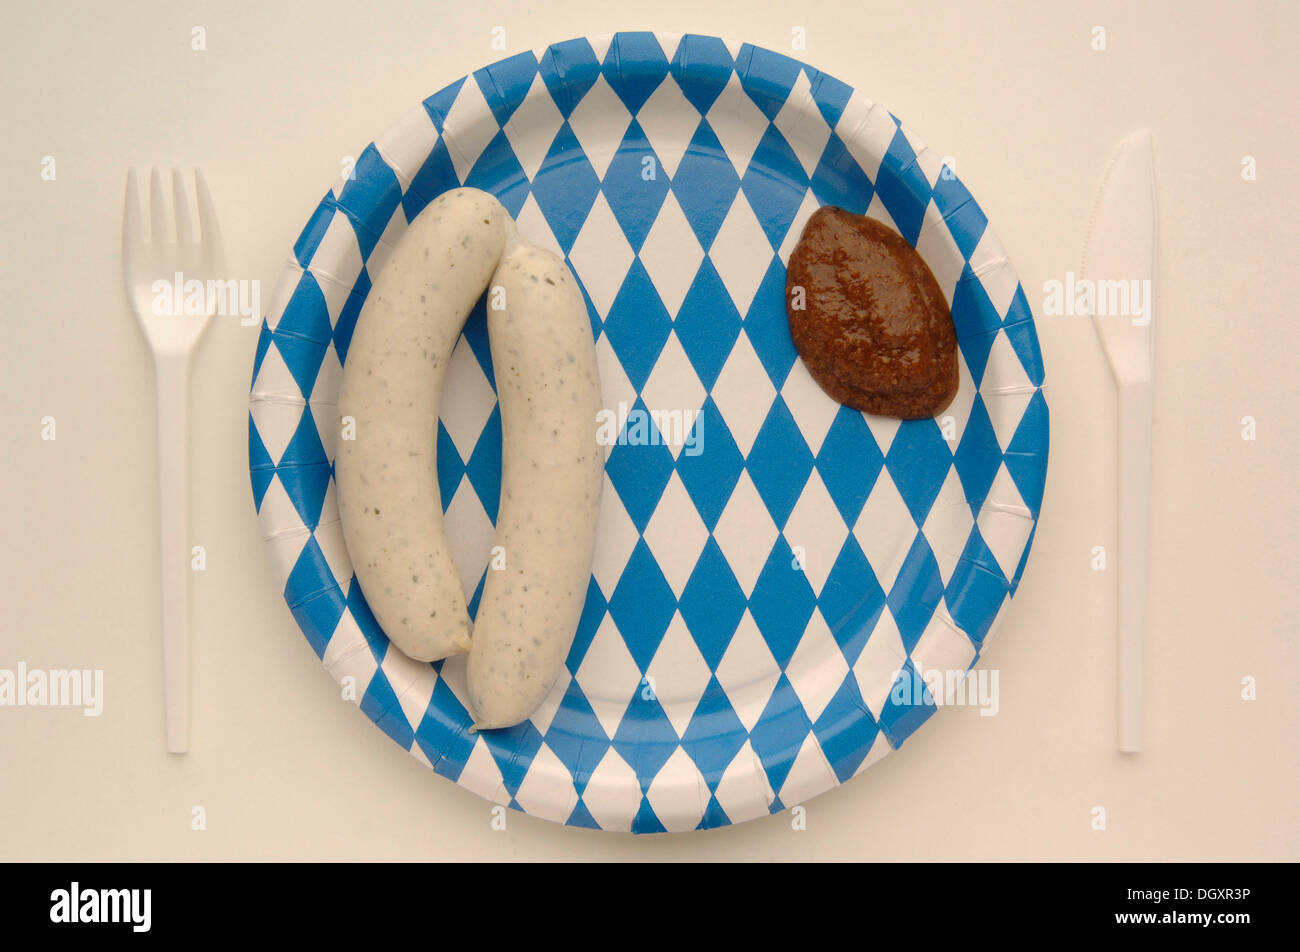 Weisswurst veal sausage with mustard on a paper plate with the Bavarian diamond pattern Stock Photo